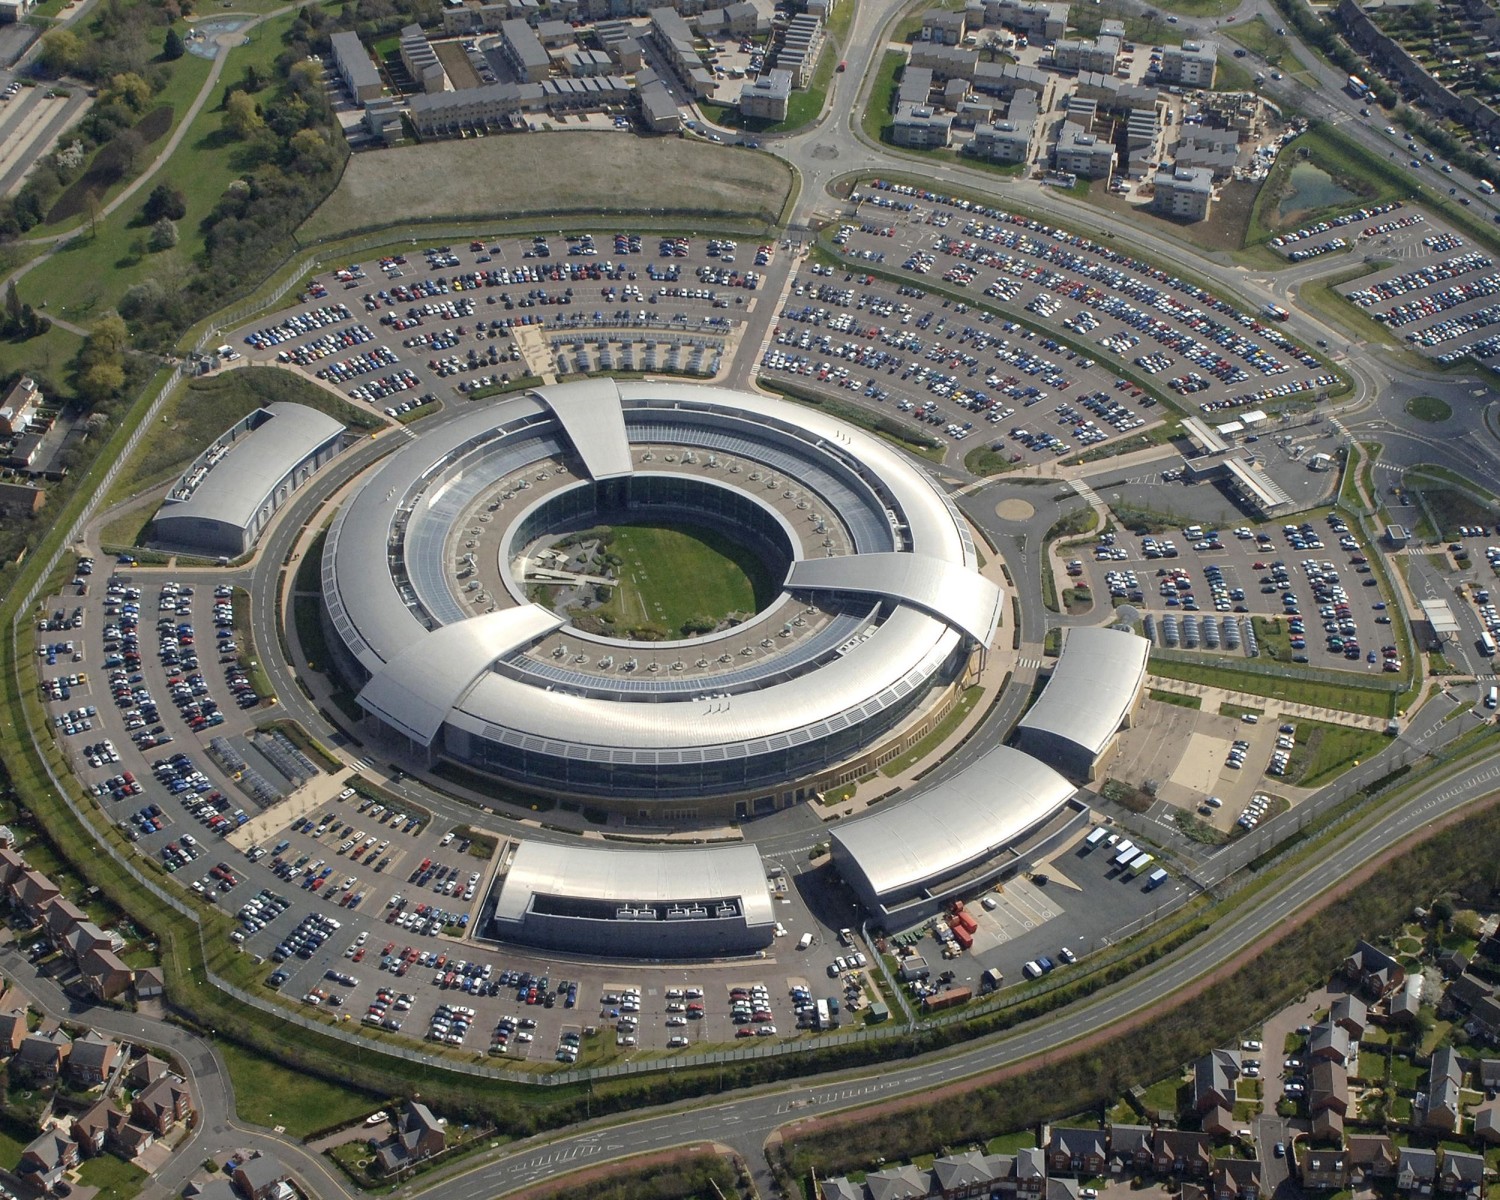 Exclusive Snowden Docs Show British Spies Used Sex and Dirty Tricks